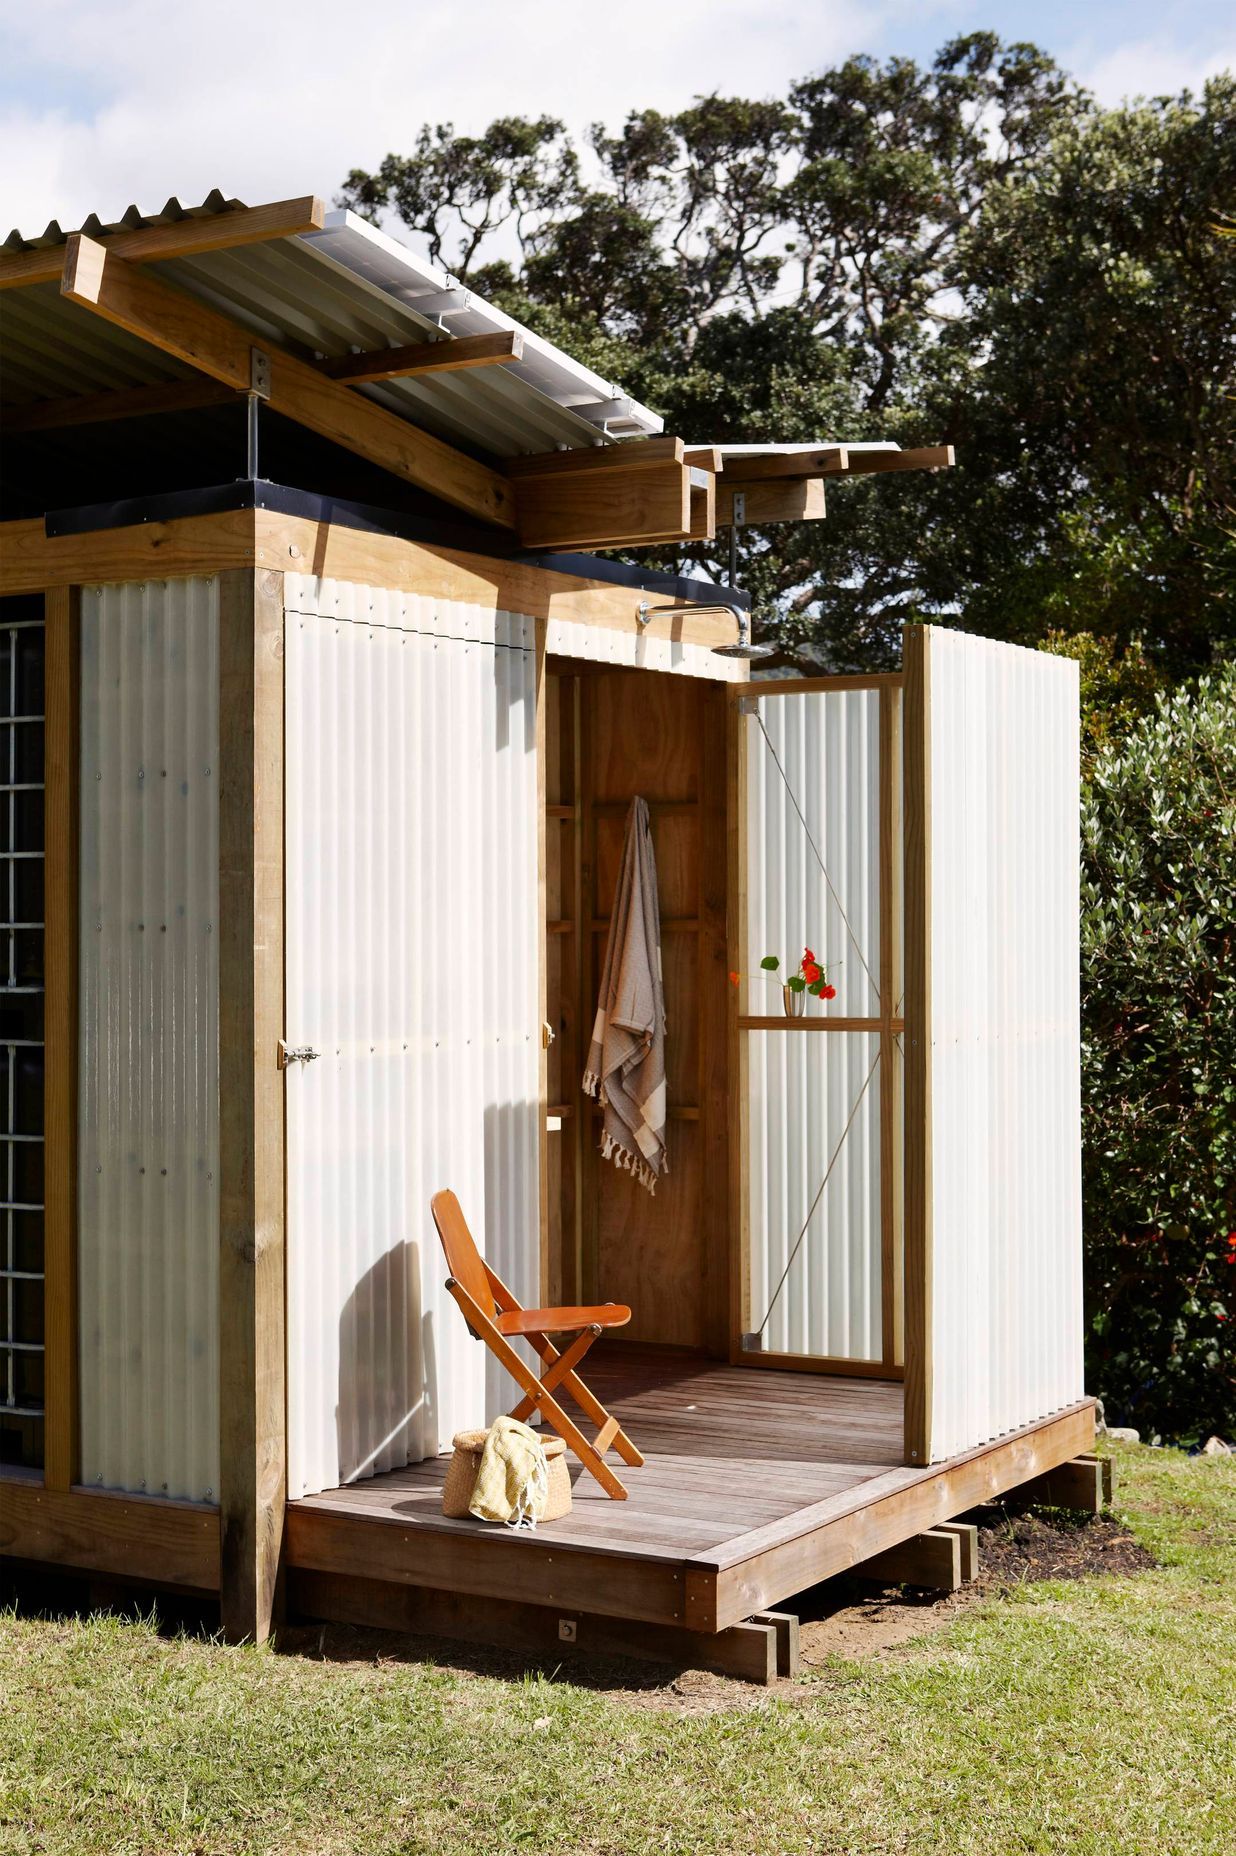 This Utility Shed by Herbst Architects has a built-in outdoor shower.